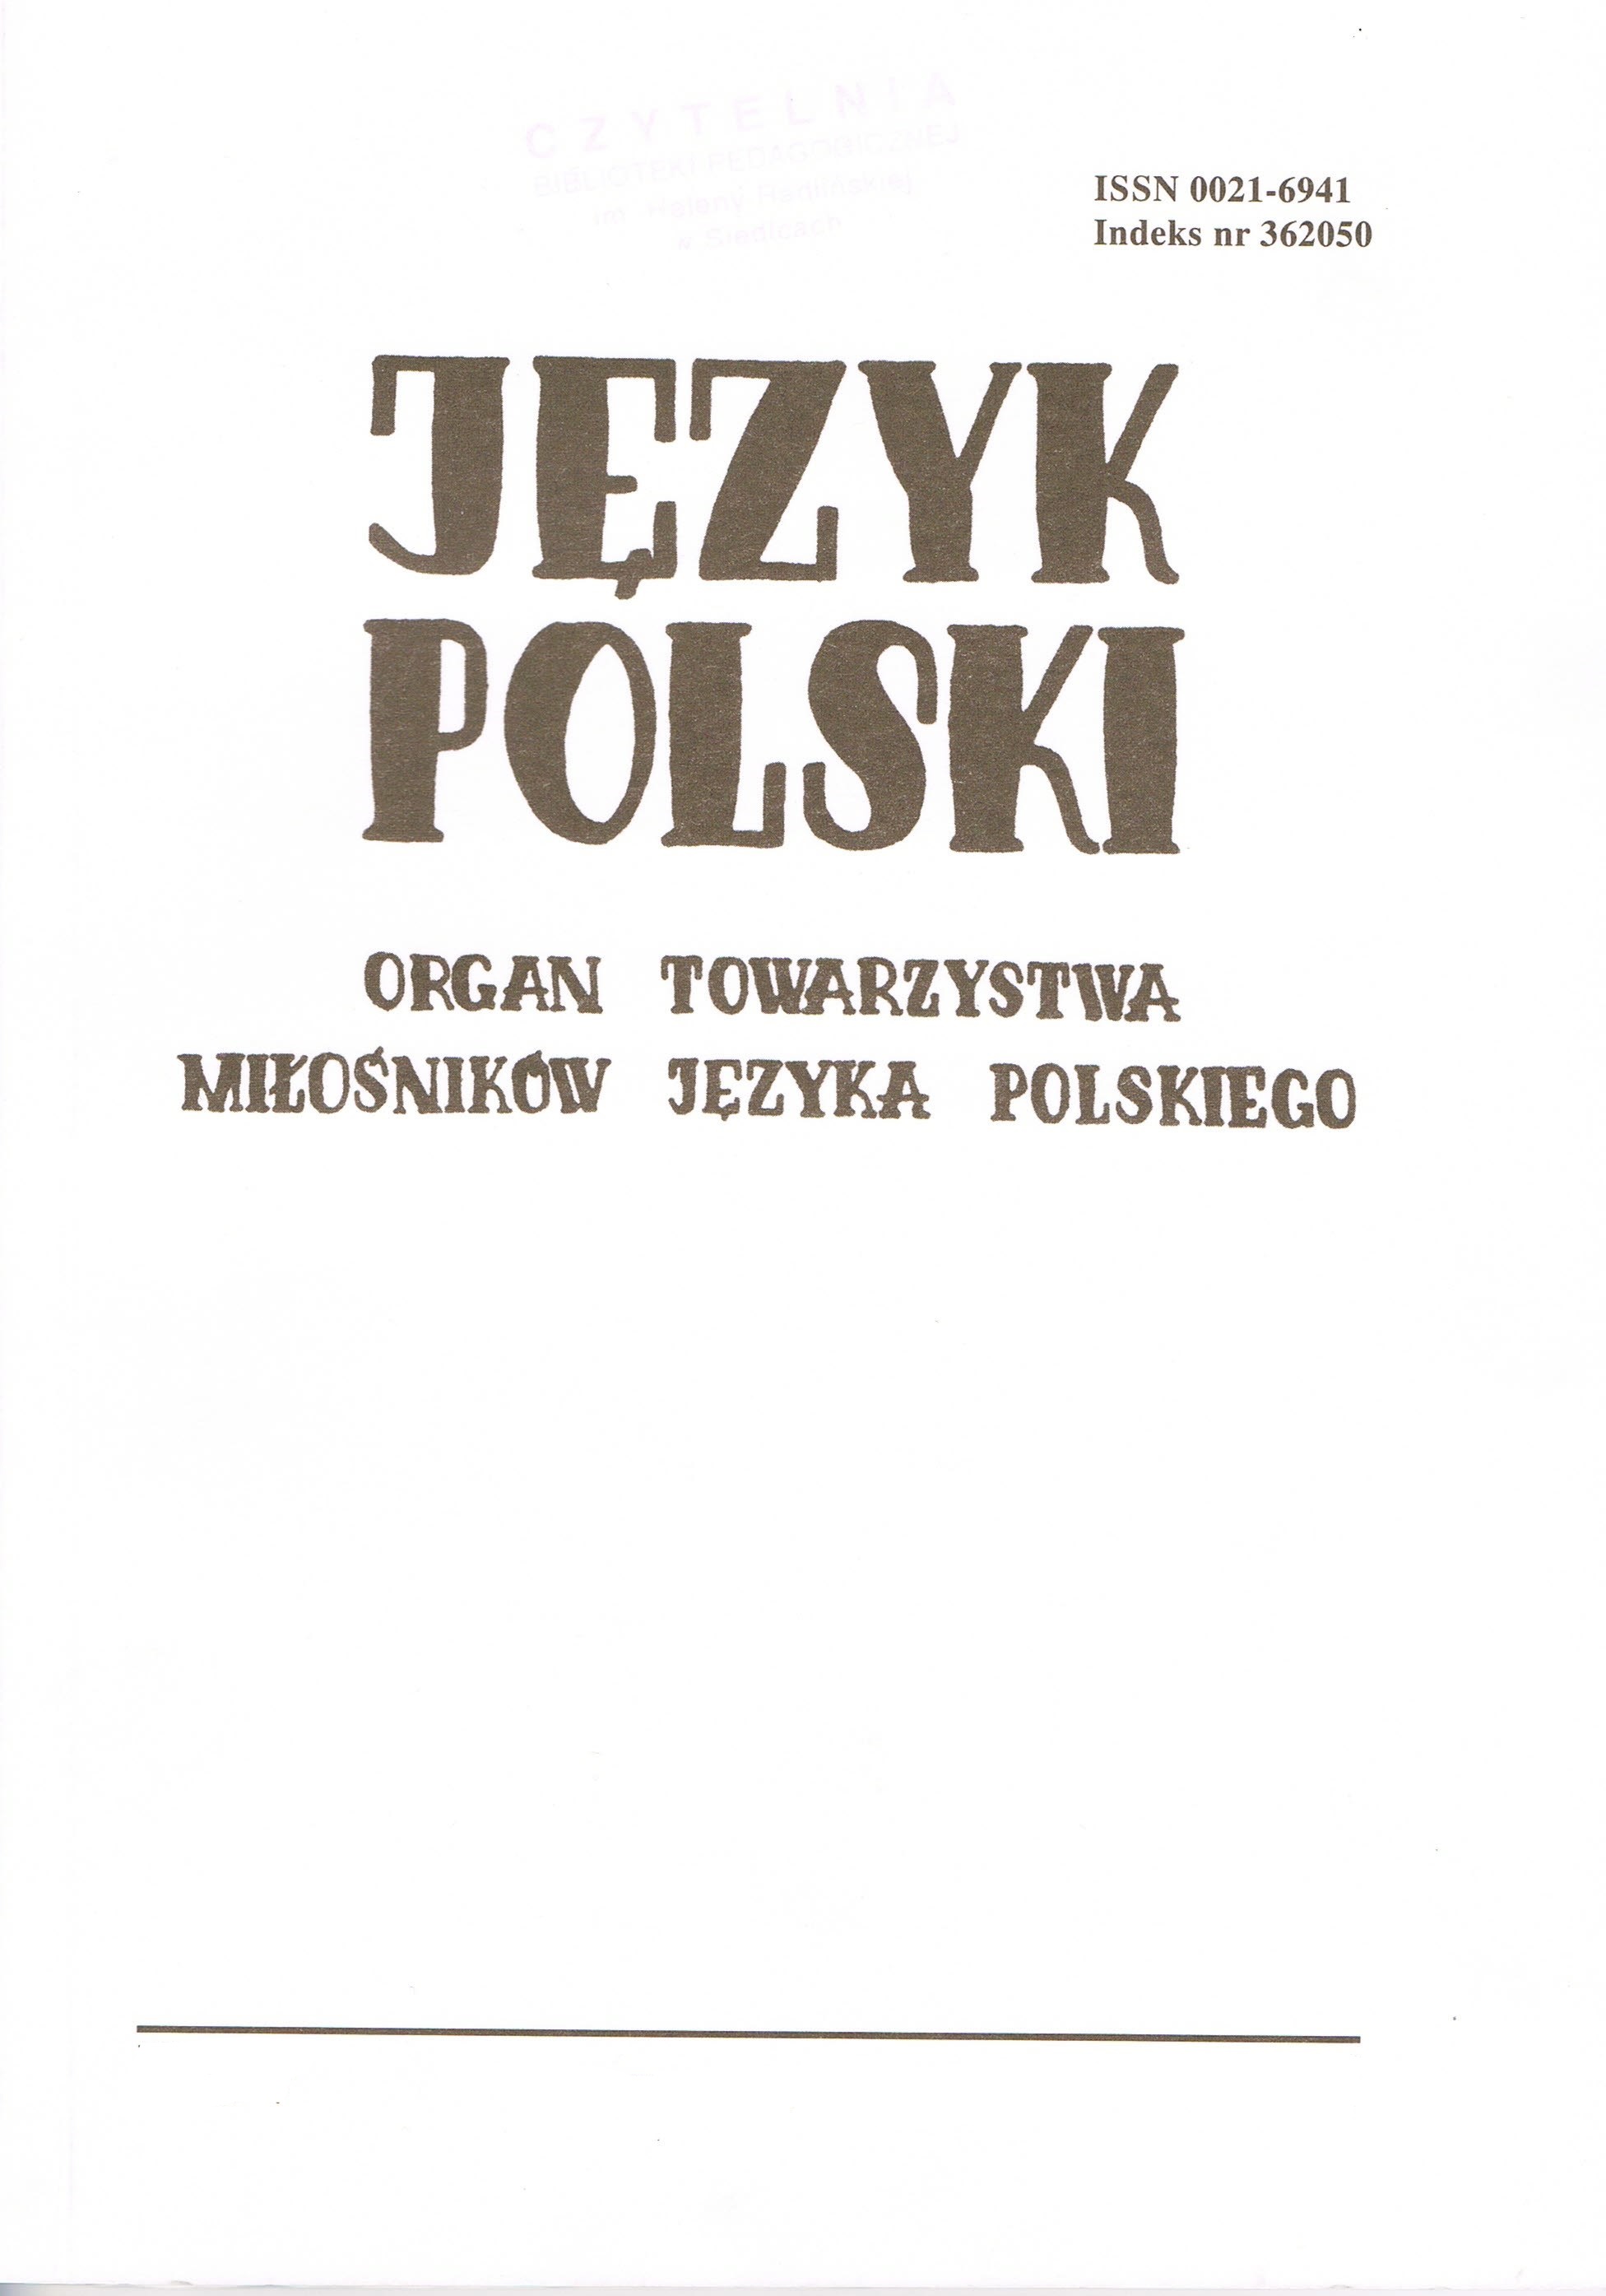 About some uses of the past tense forms in Adam Mickiewicz's “Pan Tadeusz” Cover Image